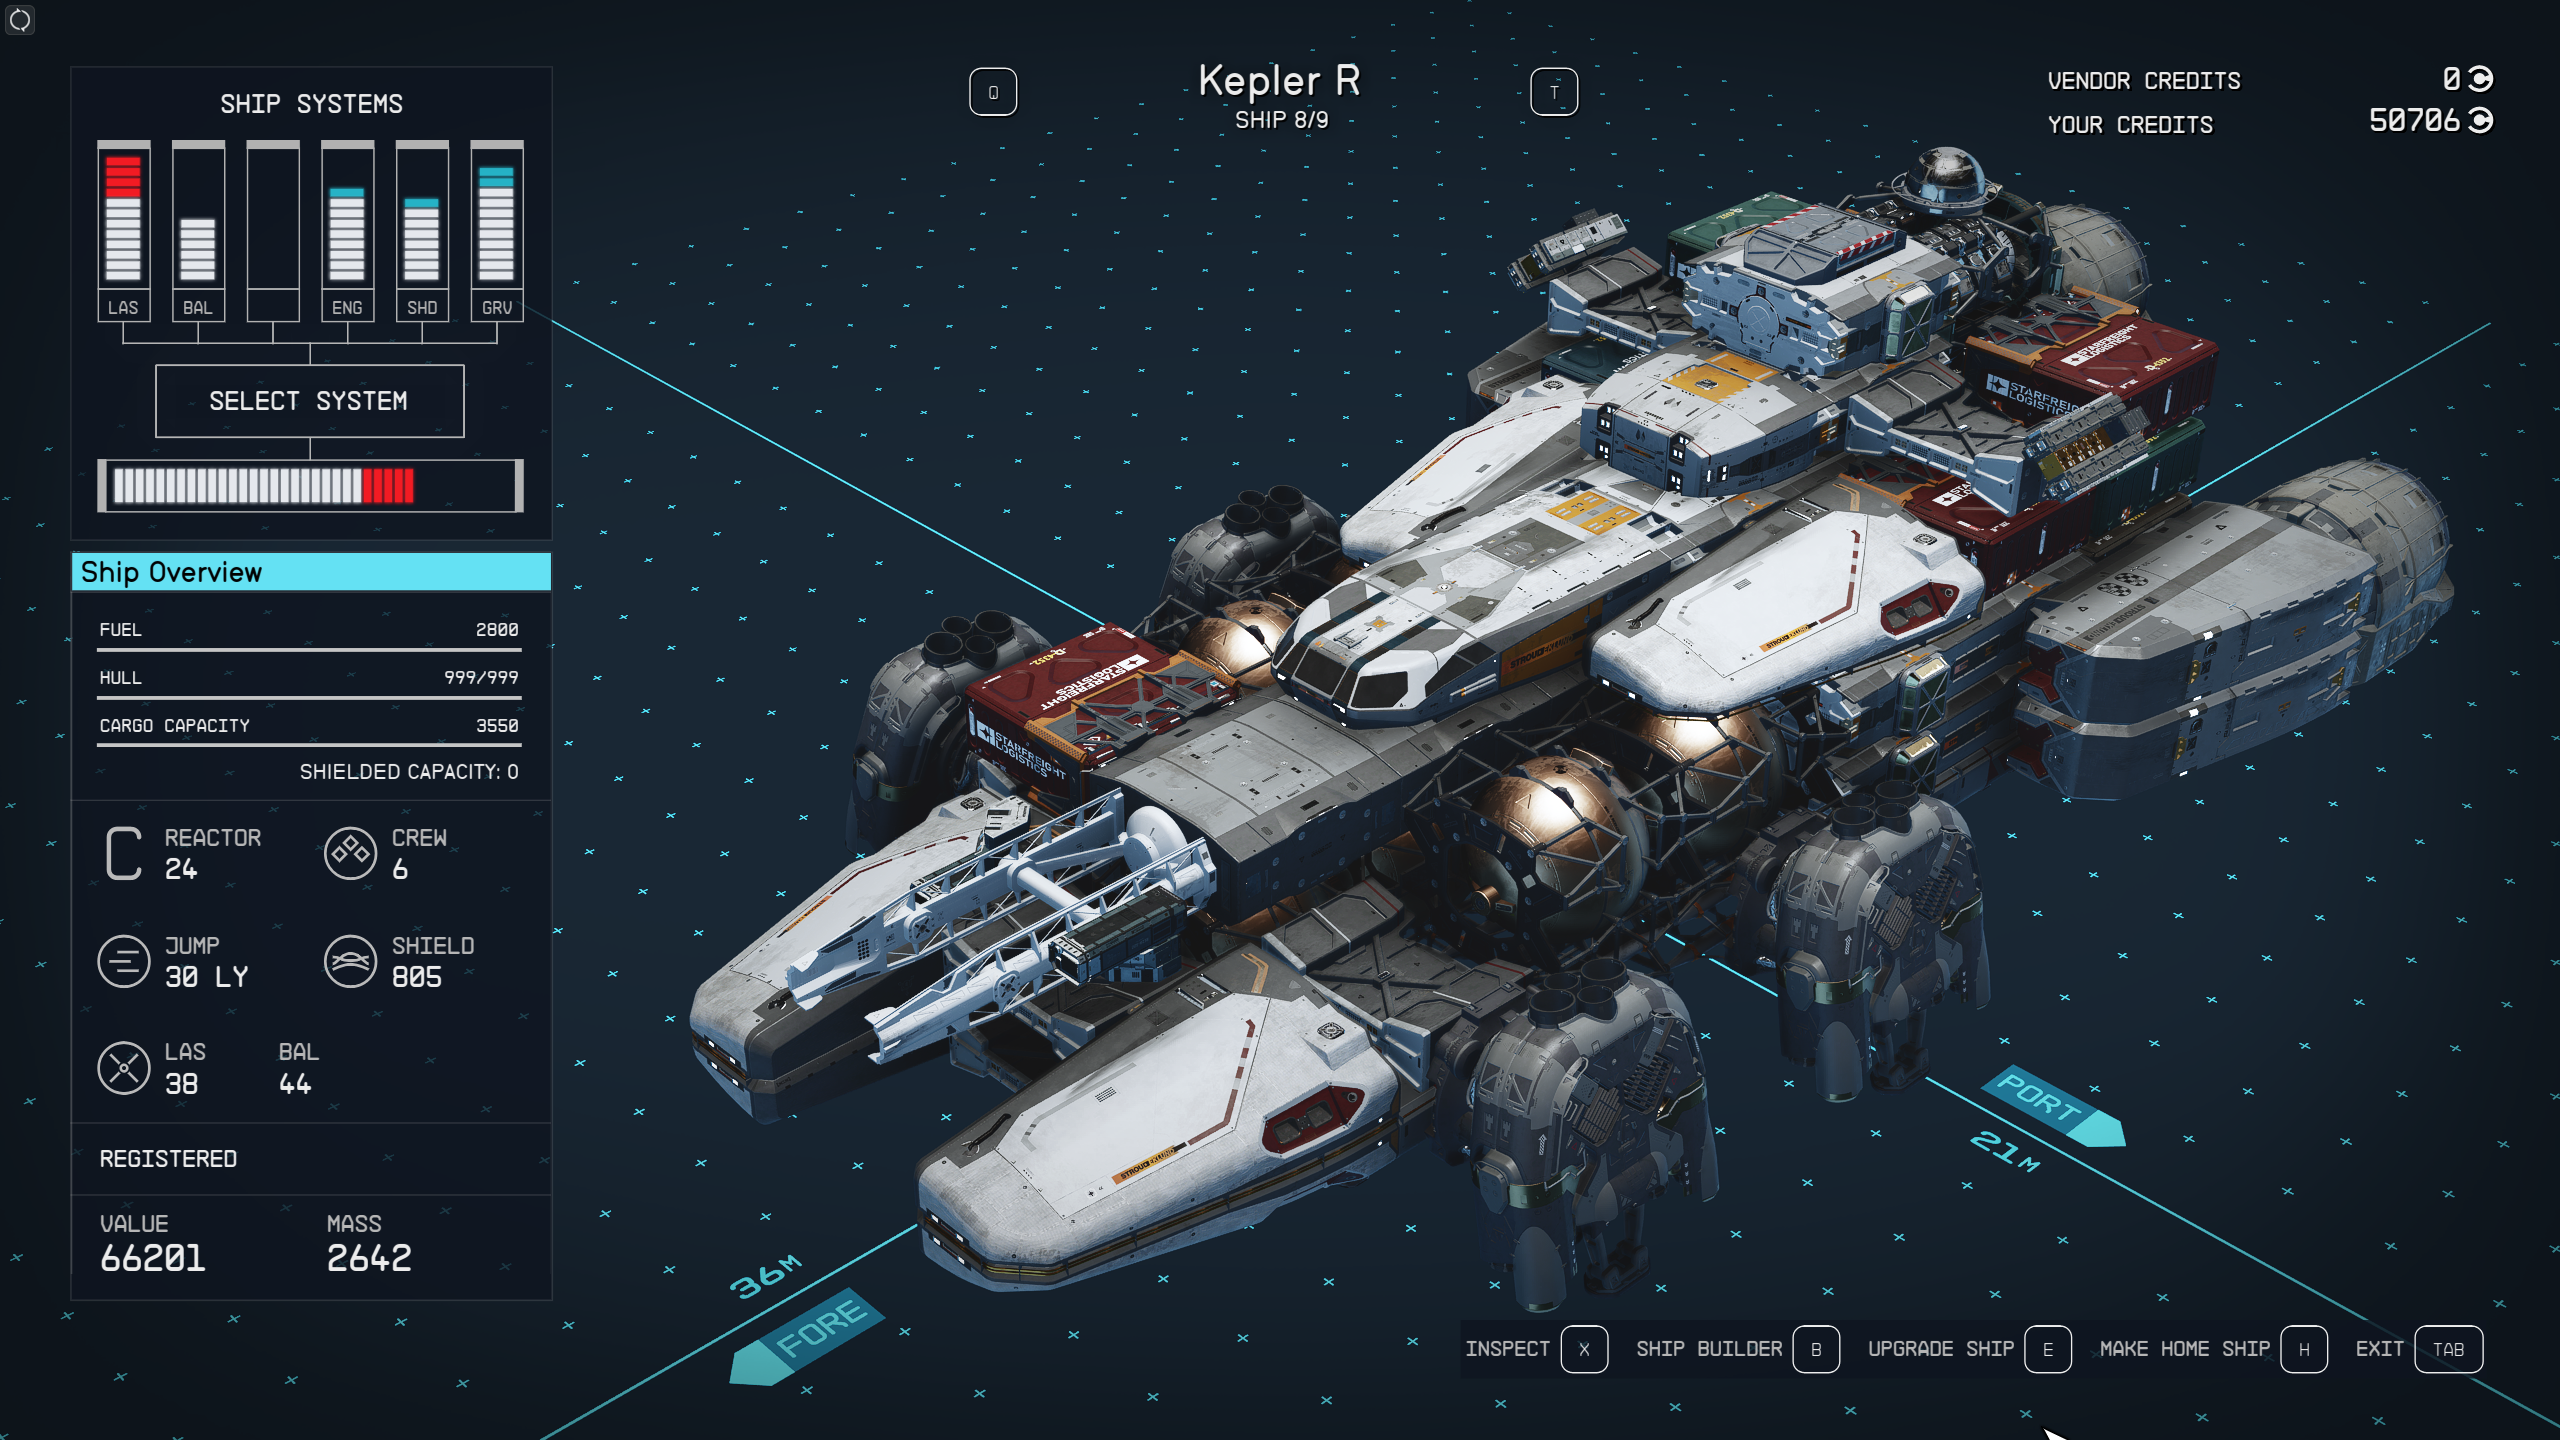 Starfield Kepler R free ship with its stays displayed